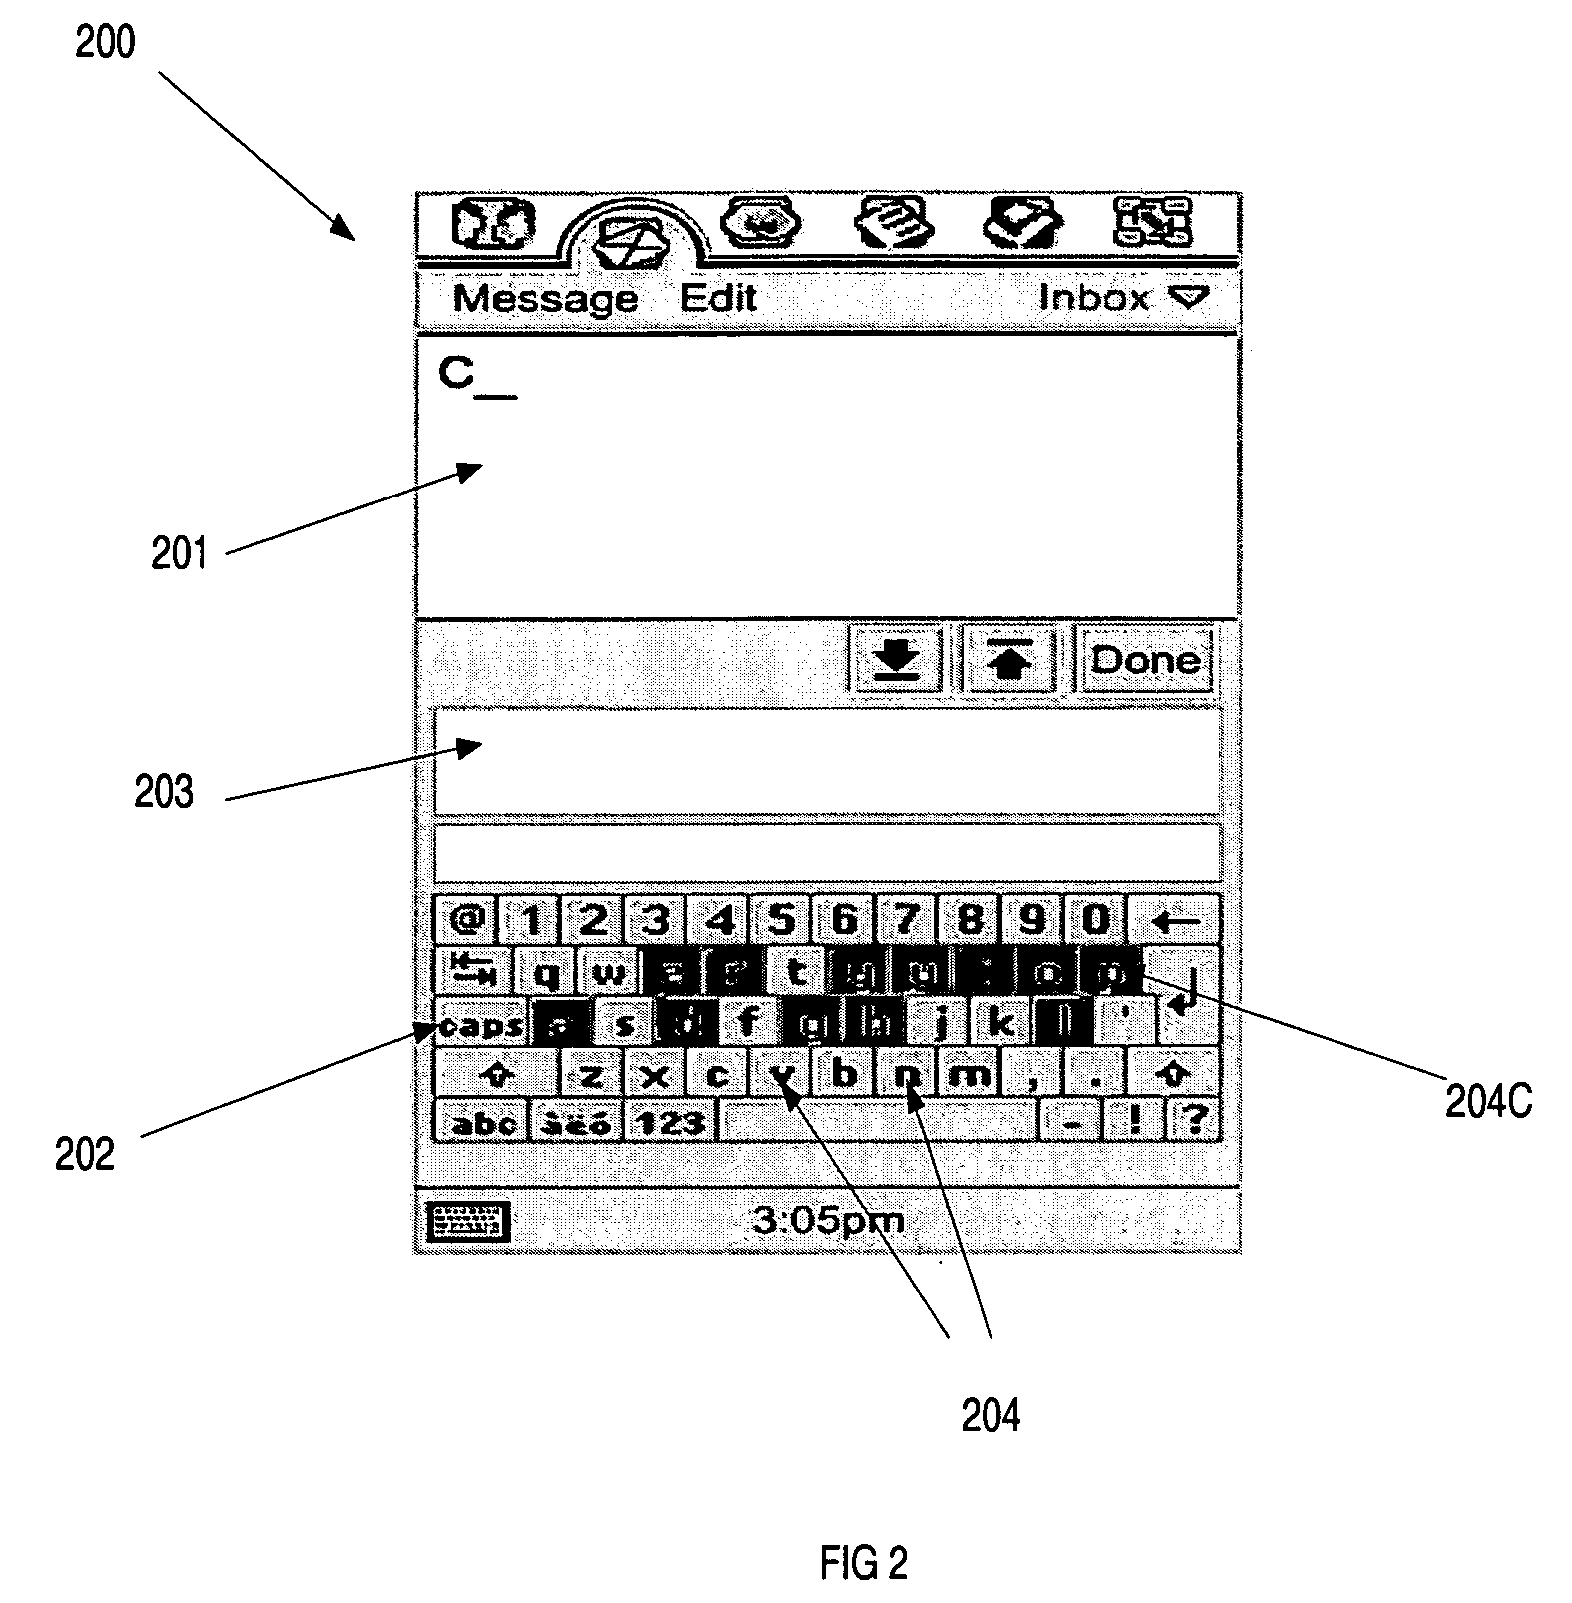 Entering a character into an electronic device